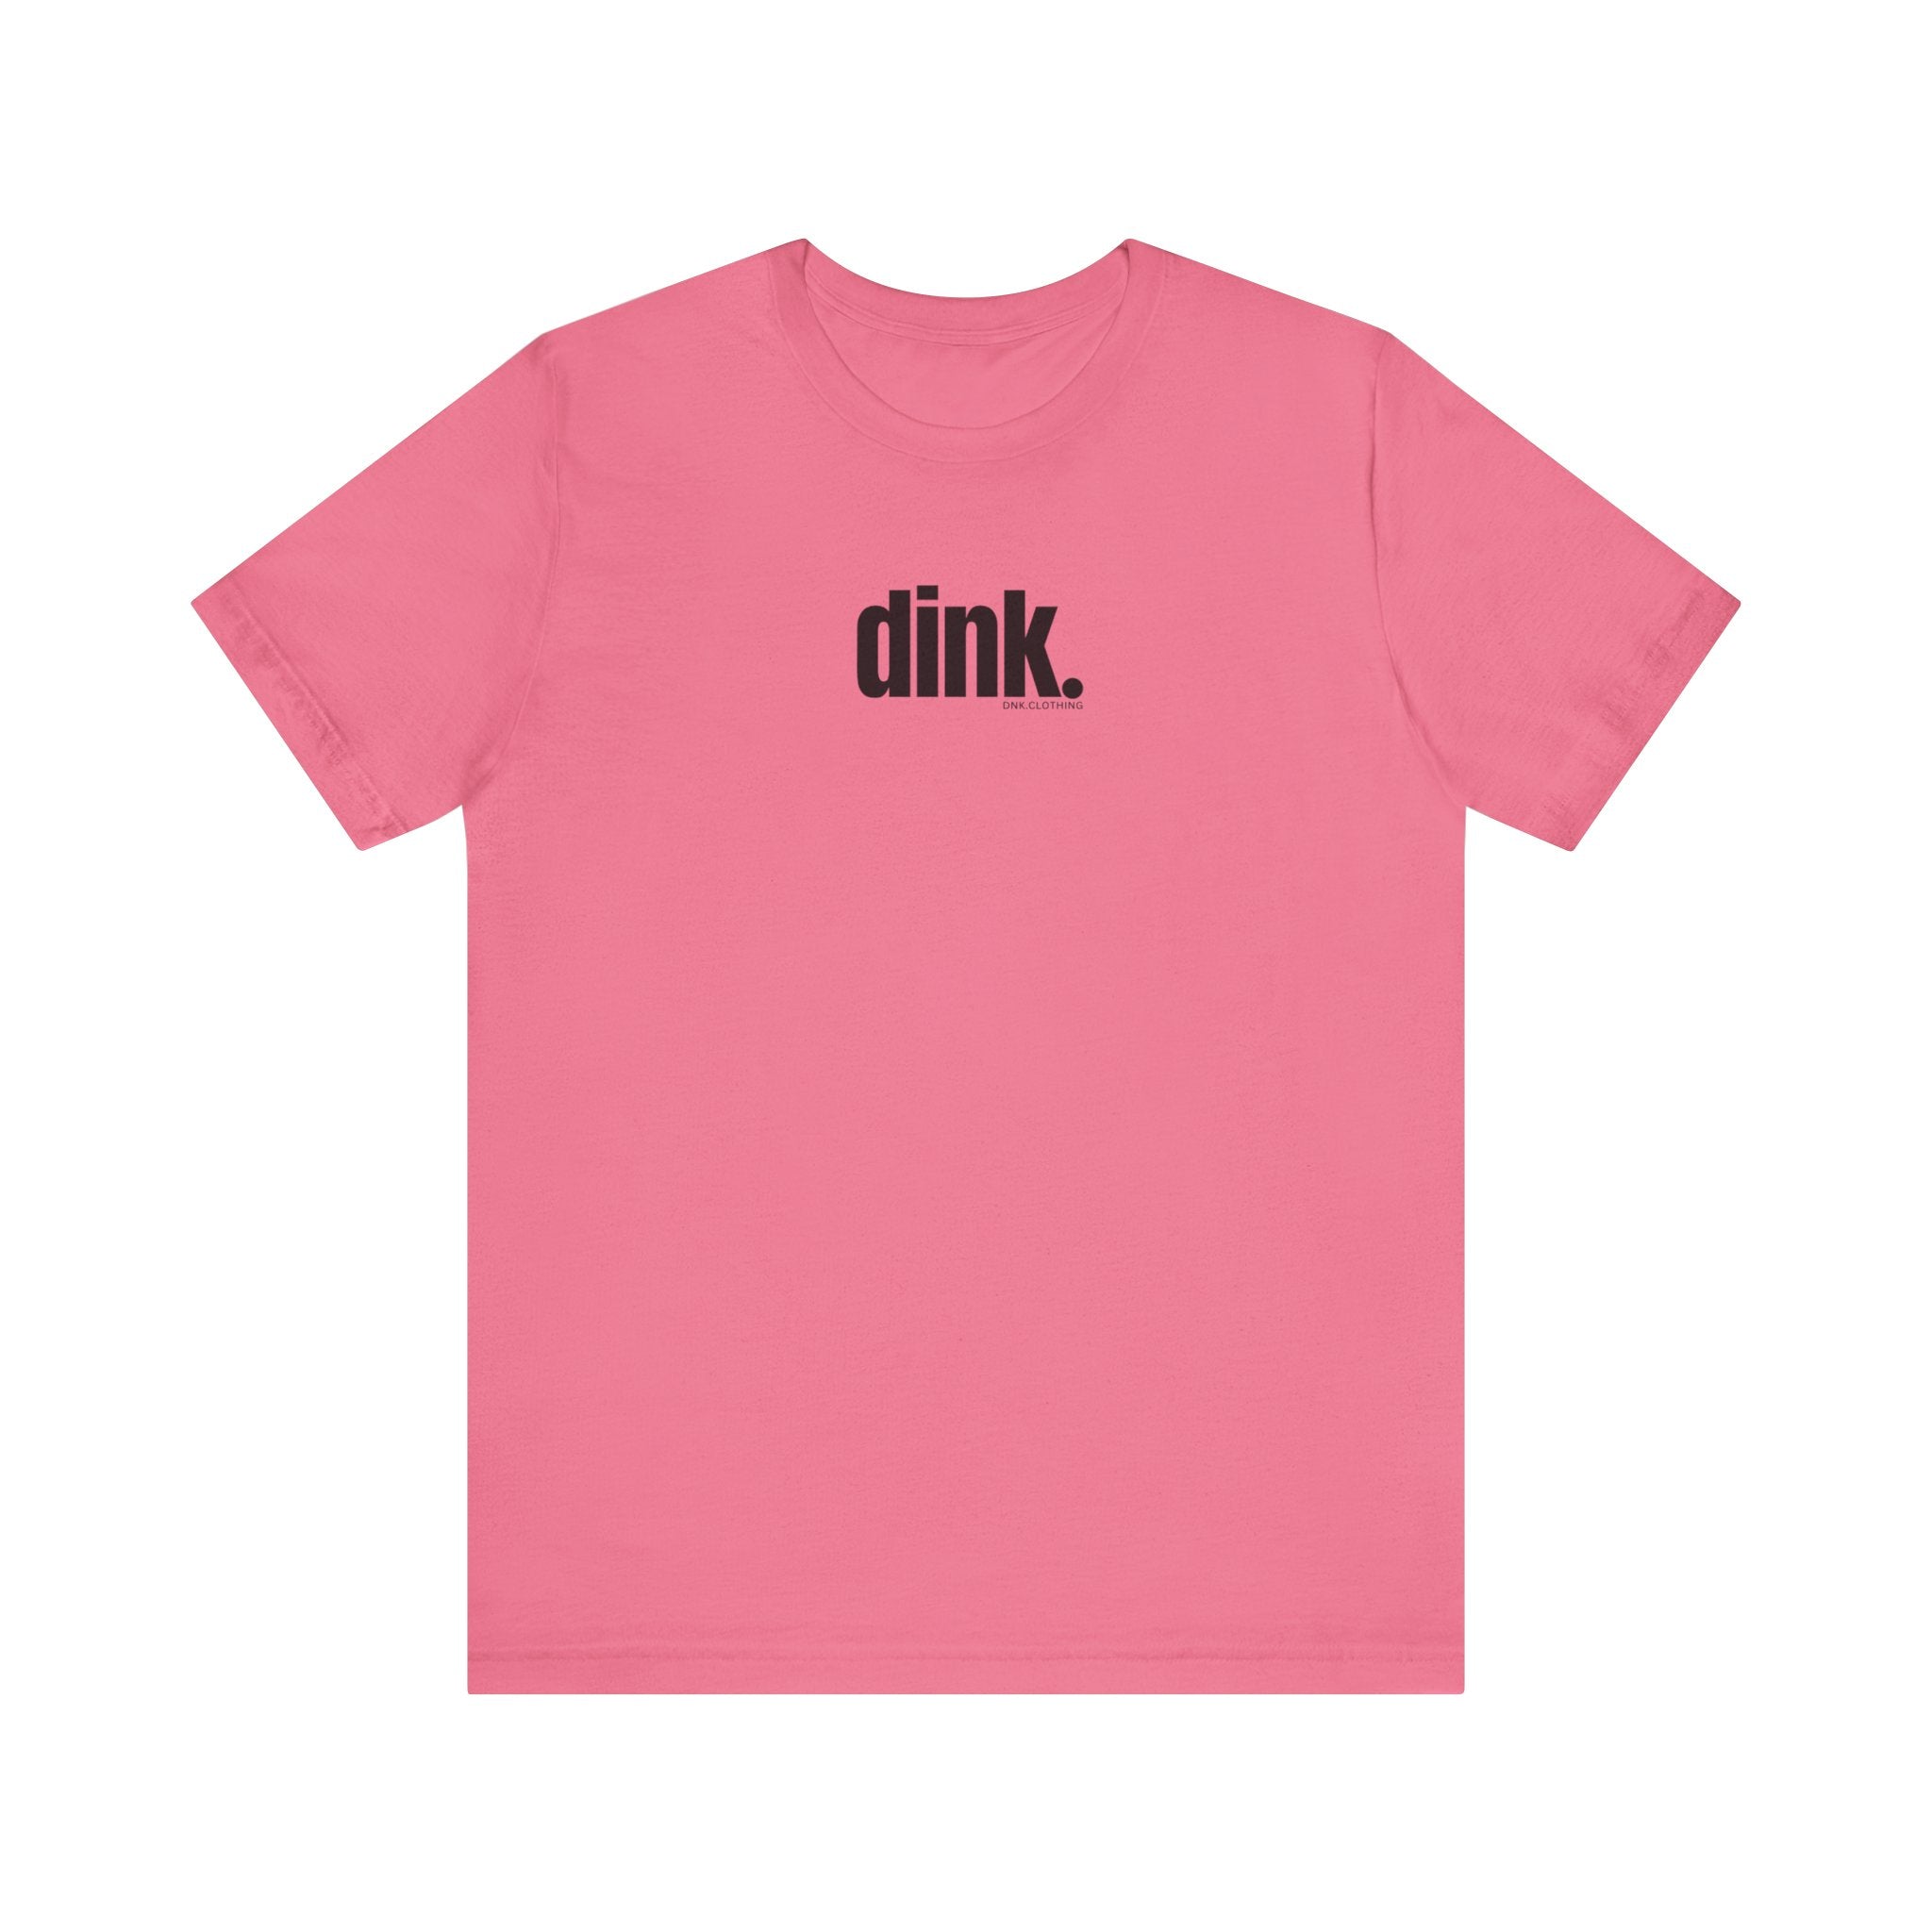 DNK dink. Tee - DNK Clothing